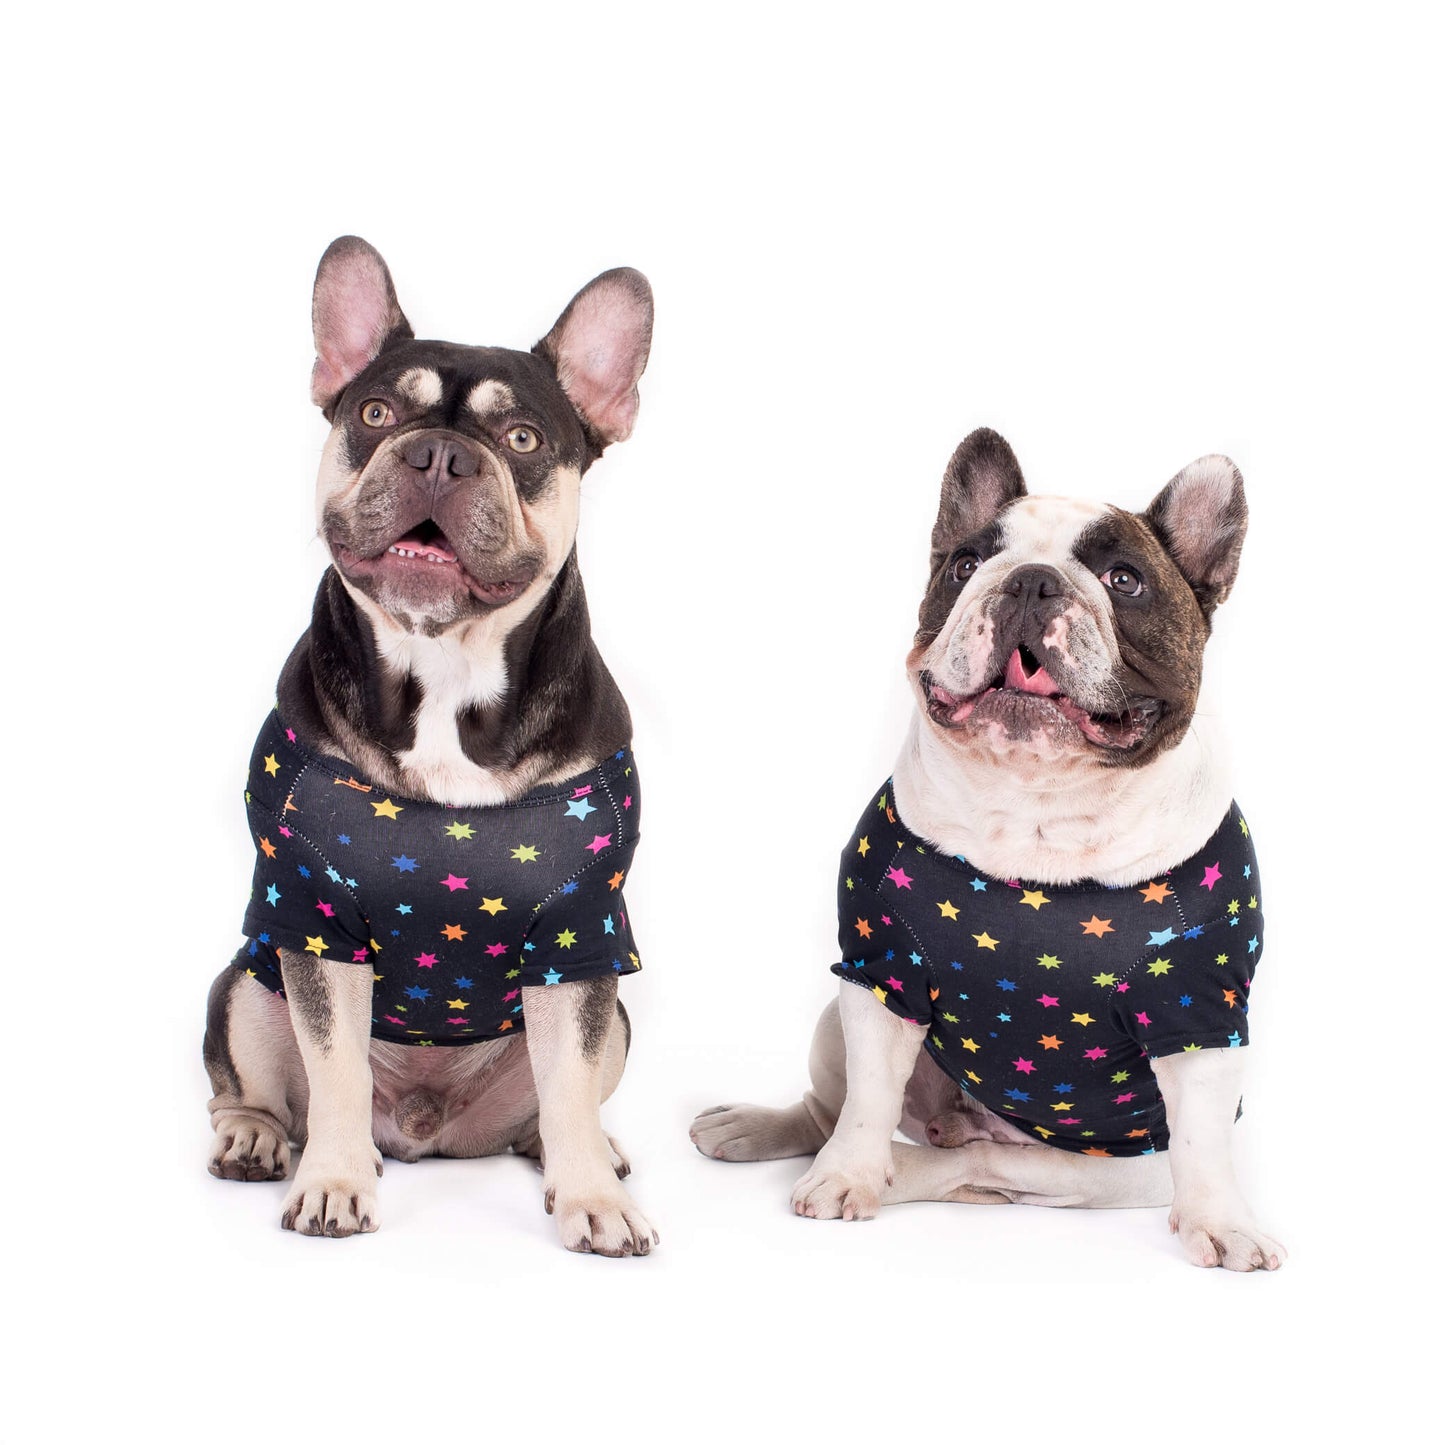 Two French Bulldogs in Star Gazer Dog Shirts - Pair of adorable French Bulldogs wearing black shirts with bright multi-colored stars - Double the style with the star gazer shirts - Shop now for trendy dog shirts and clothing with eye-catching designs.